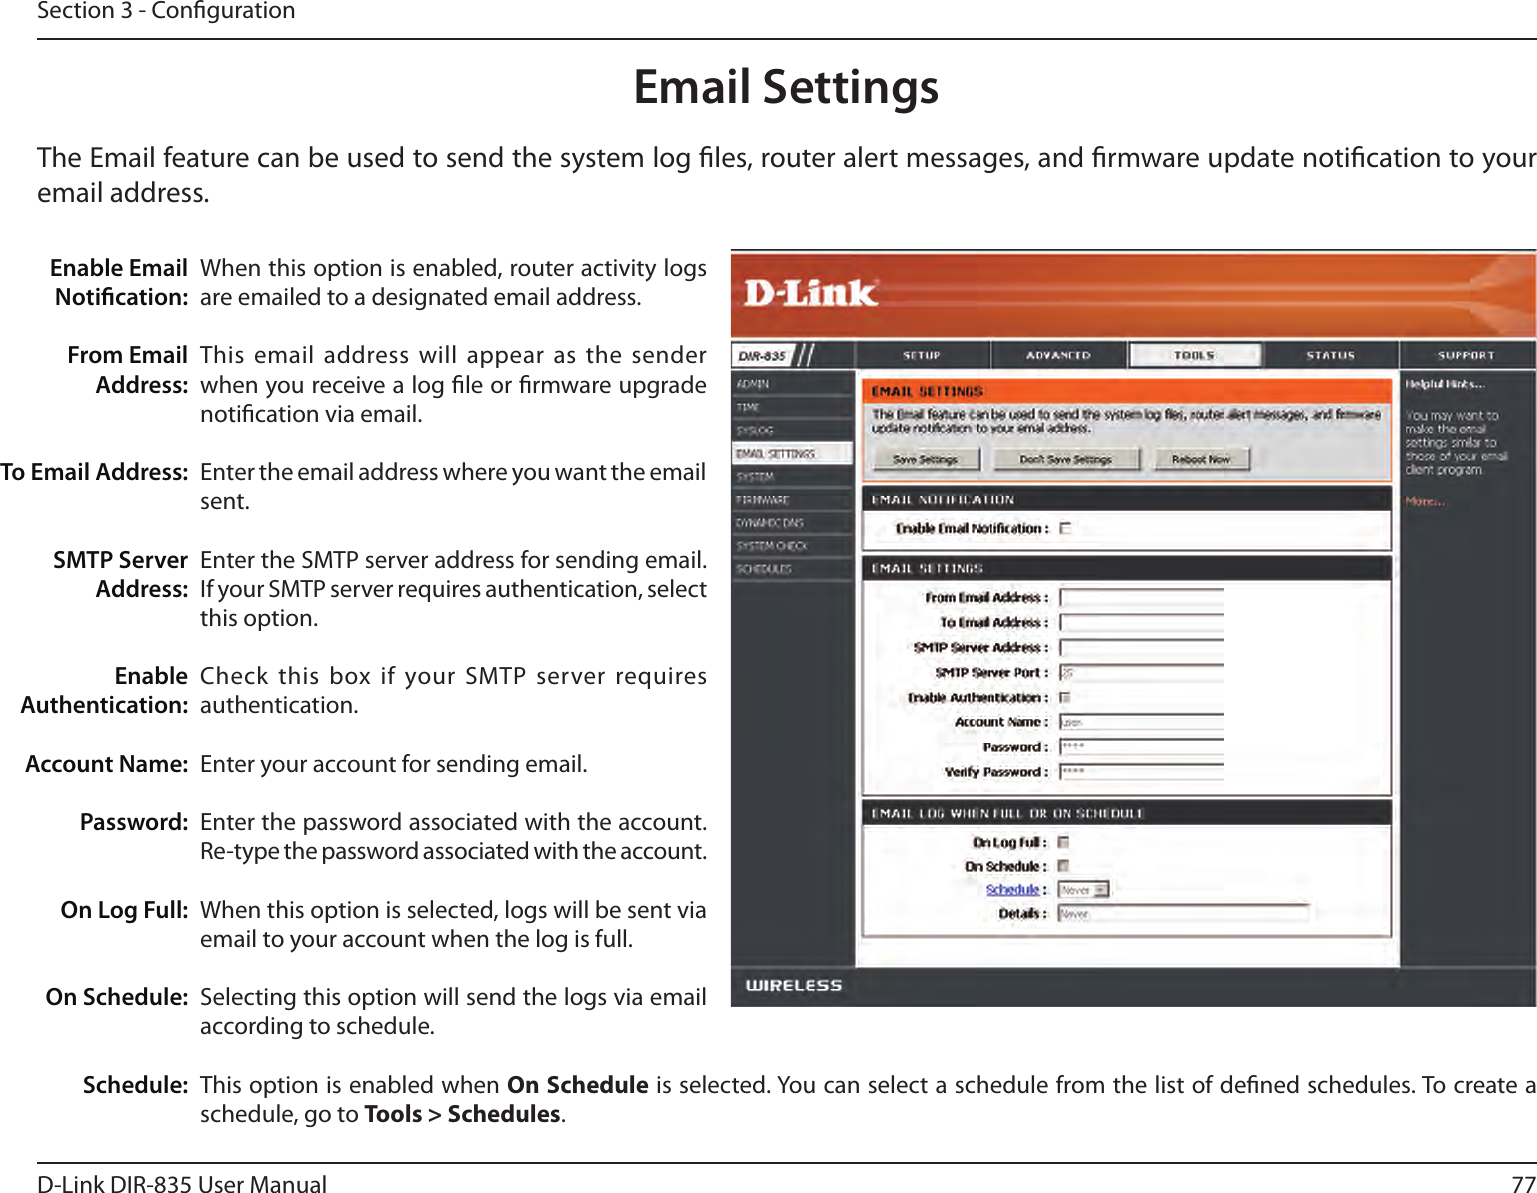 77D-Link DIR-835 User ManualSection 3 - CongurationEmail SettingsThe Email feature can be used to send the system log les, router alert messages, and rmware update notication to your email address. Enable Email Notication: From Email Address:To Email Address:SMTP Server Address:Enable Authentication:Account Name:Password:On Log Full:On Schedule:Schedule:When this option is enabled, router activity logs are emailed to a designated email address.This email address will appear  as the sender when you receive a log le or rmware upgrade notication via email.Enter the email address where you want the email sent. Enter the SMTP server address for sending email. If your SMTP server requires authentication, select this option.Check this  box if your SMTP server requires authentication. Enter your account for sending email.Enter the password associated with the account. Re-type the password associated with the account.When this option is selected, logs will be sent via email to your account when the log is full.Selecting this option will send the logs via email according to schedule.This option is enabled when On Schedule is selected. You can select a schedule from the list of dened schedules. To create a schedule, go to Tools &gt; Schedules.